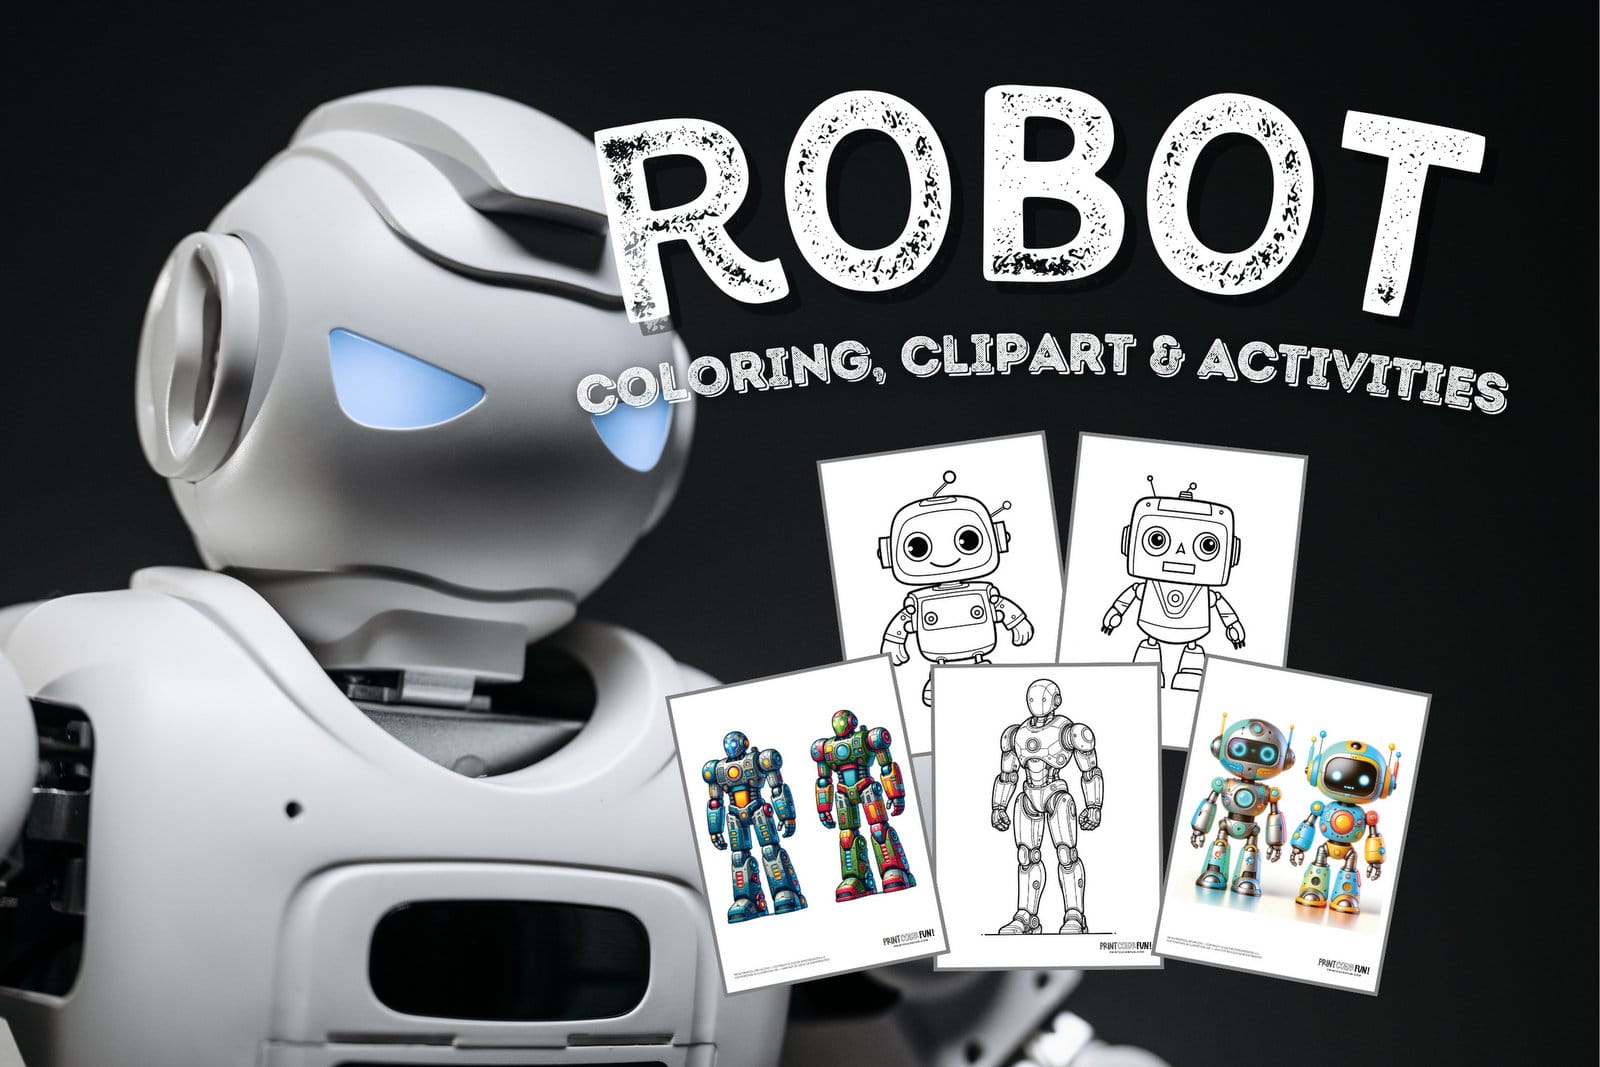 Robot coloring page clipart activities from PrintColorFun com